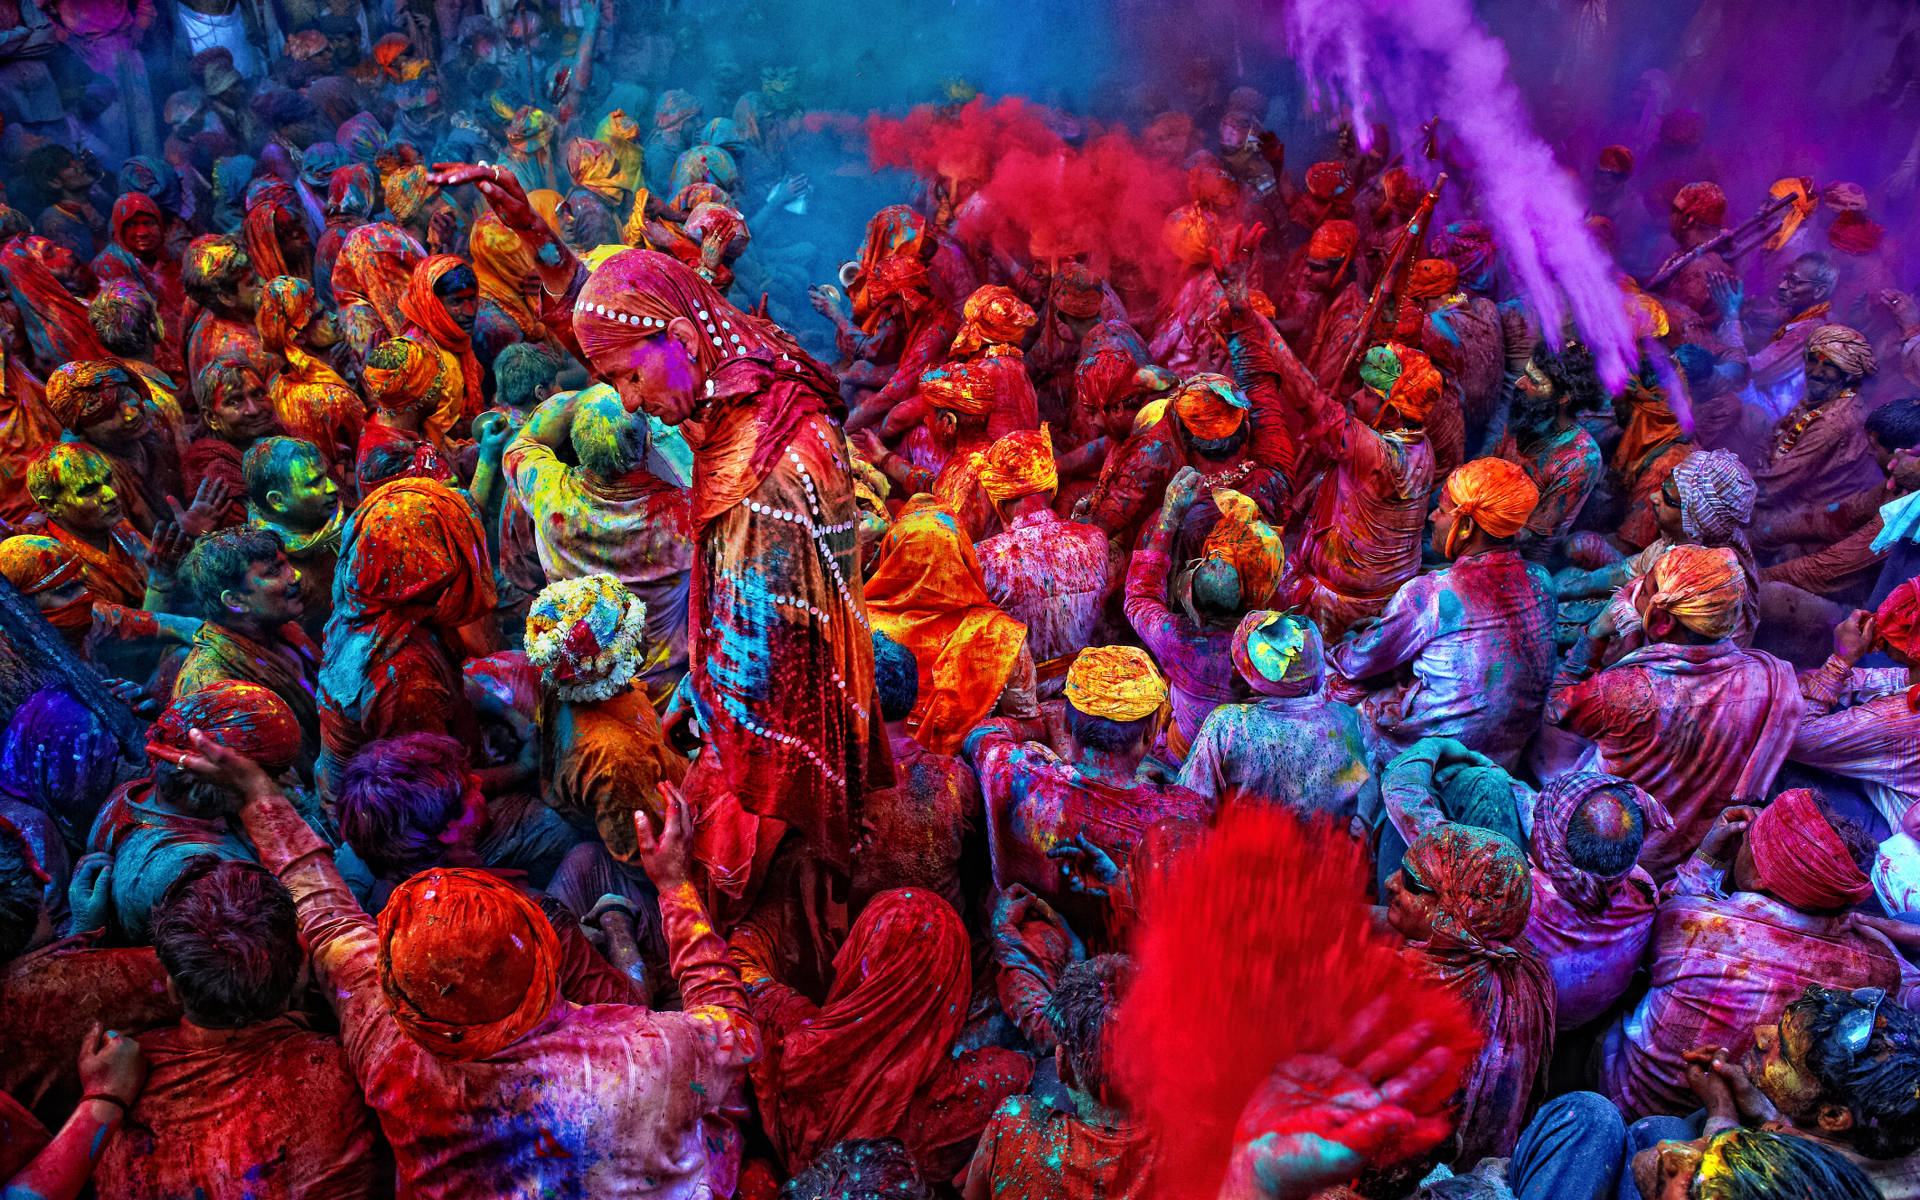 Celebrate vibrancy and joy with this Happy Holi HD image depicting a colorful crowd. Wallpaper